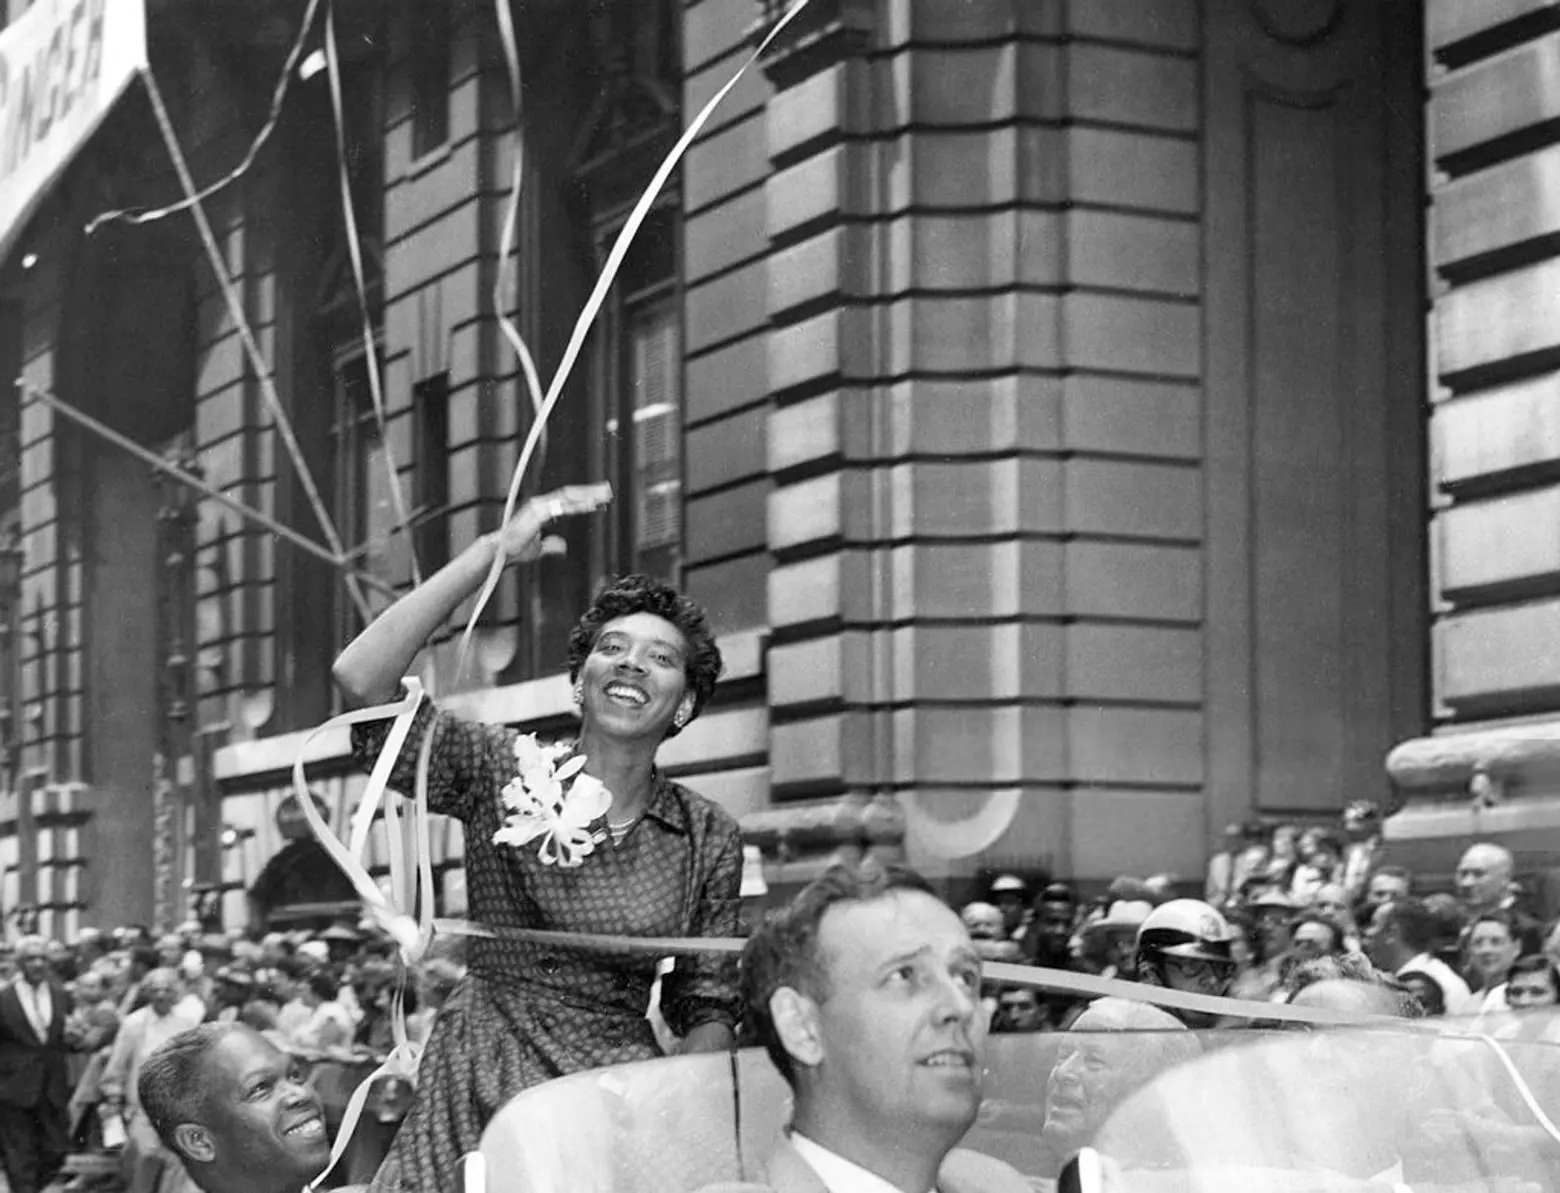 NYC renames Harlem street in honor of tennis star Althea Gibson